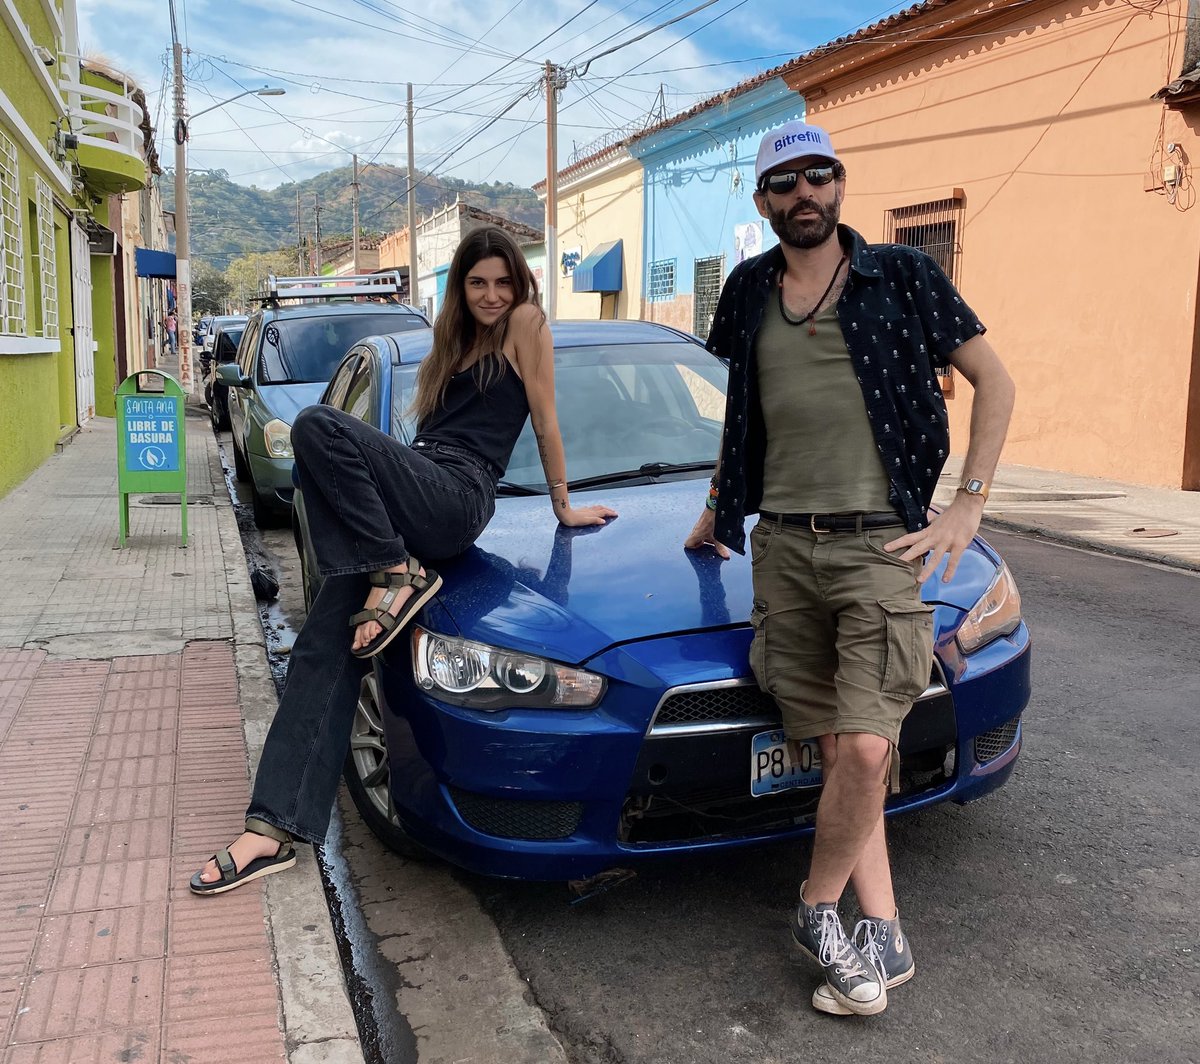 Living #Bitcoin only is possible? We just did it! 45 days traveling all over #ElSalvador spending only bitcoin. 🇸🇻
 
More than 10 cities, hotels, restaurants, breakfasts, cars, gas stations, SIM cards, coffee, drinks and more at our fingertips thanks to the #LightningNetwork ⚡️